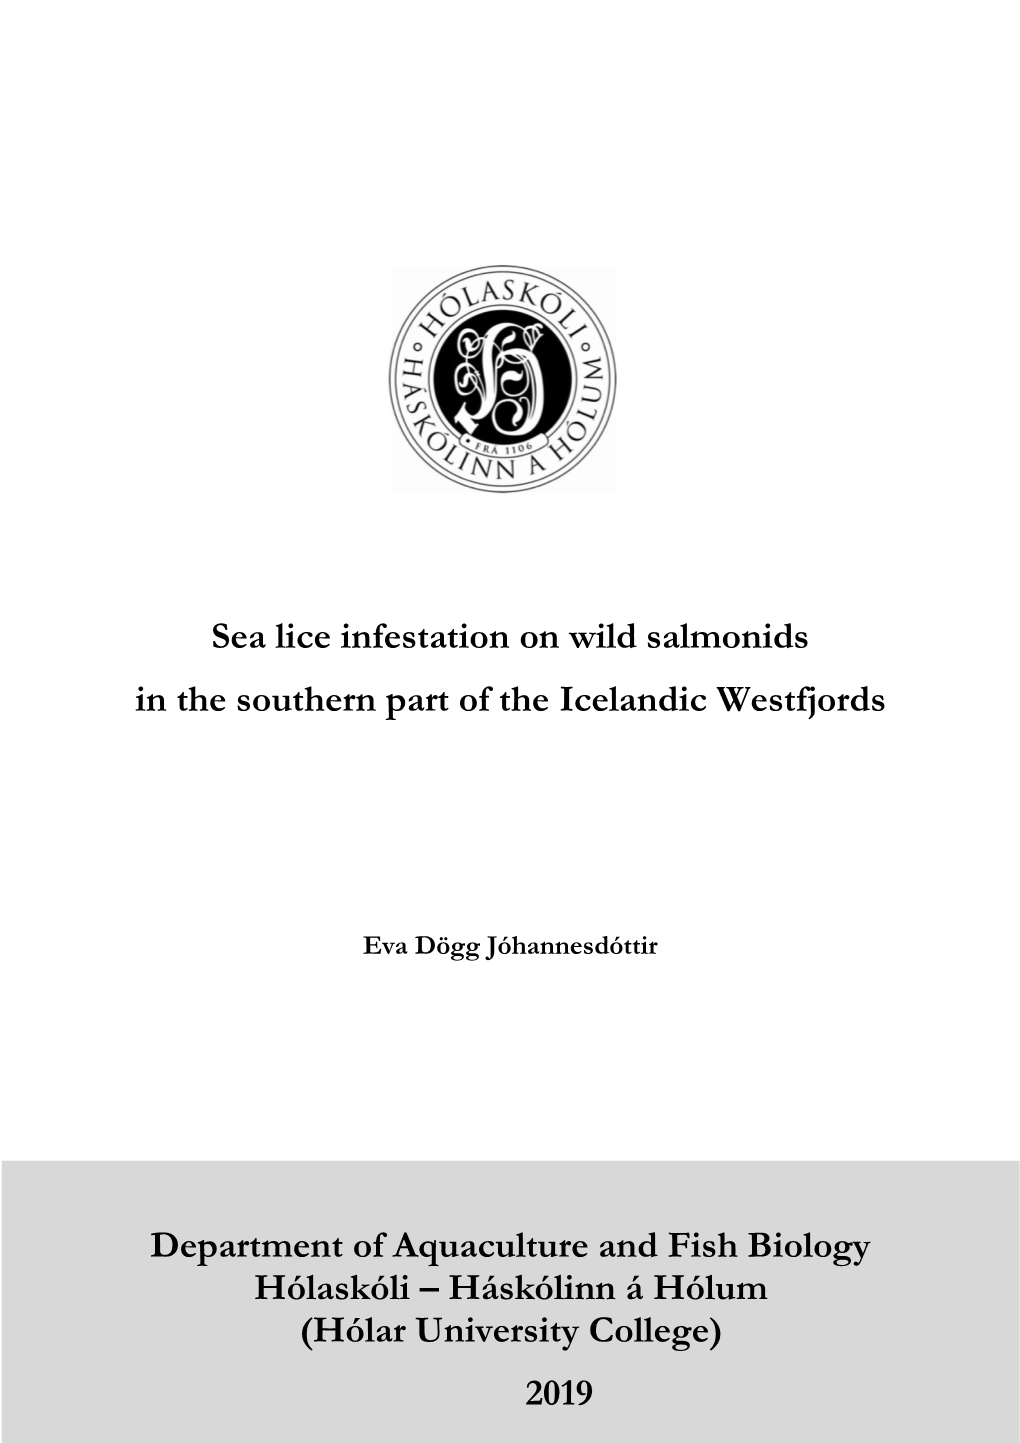 Sea Lice Infestation on Wild Salmonids in the Southern Part of the Icelandic Westfjords Department of Aquaculture and Fish Biol